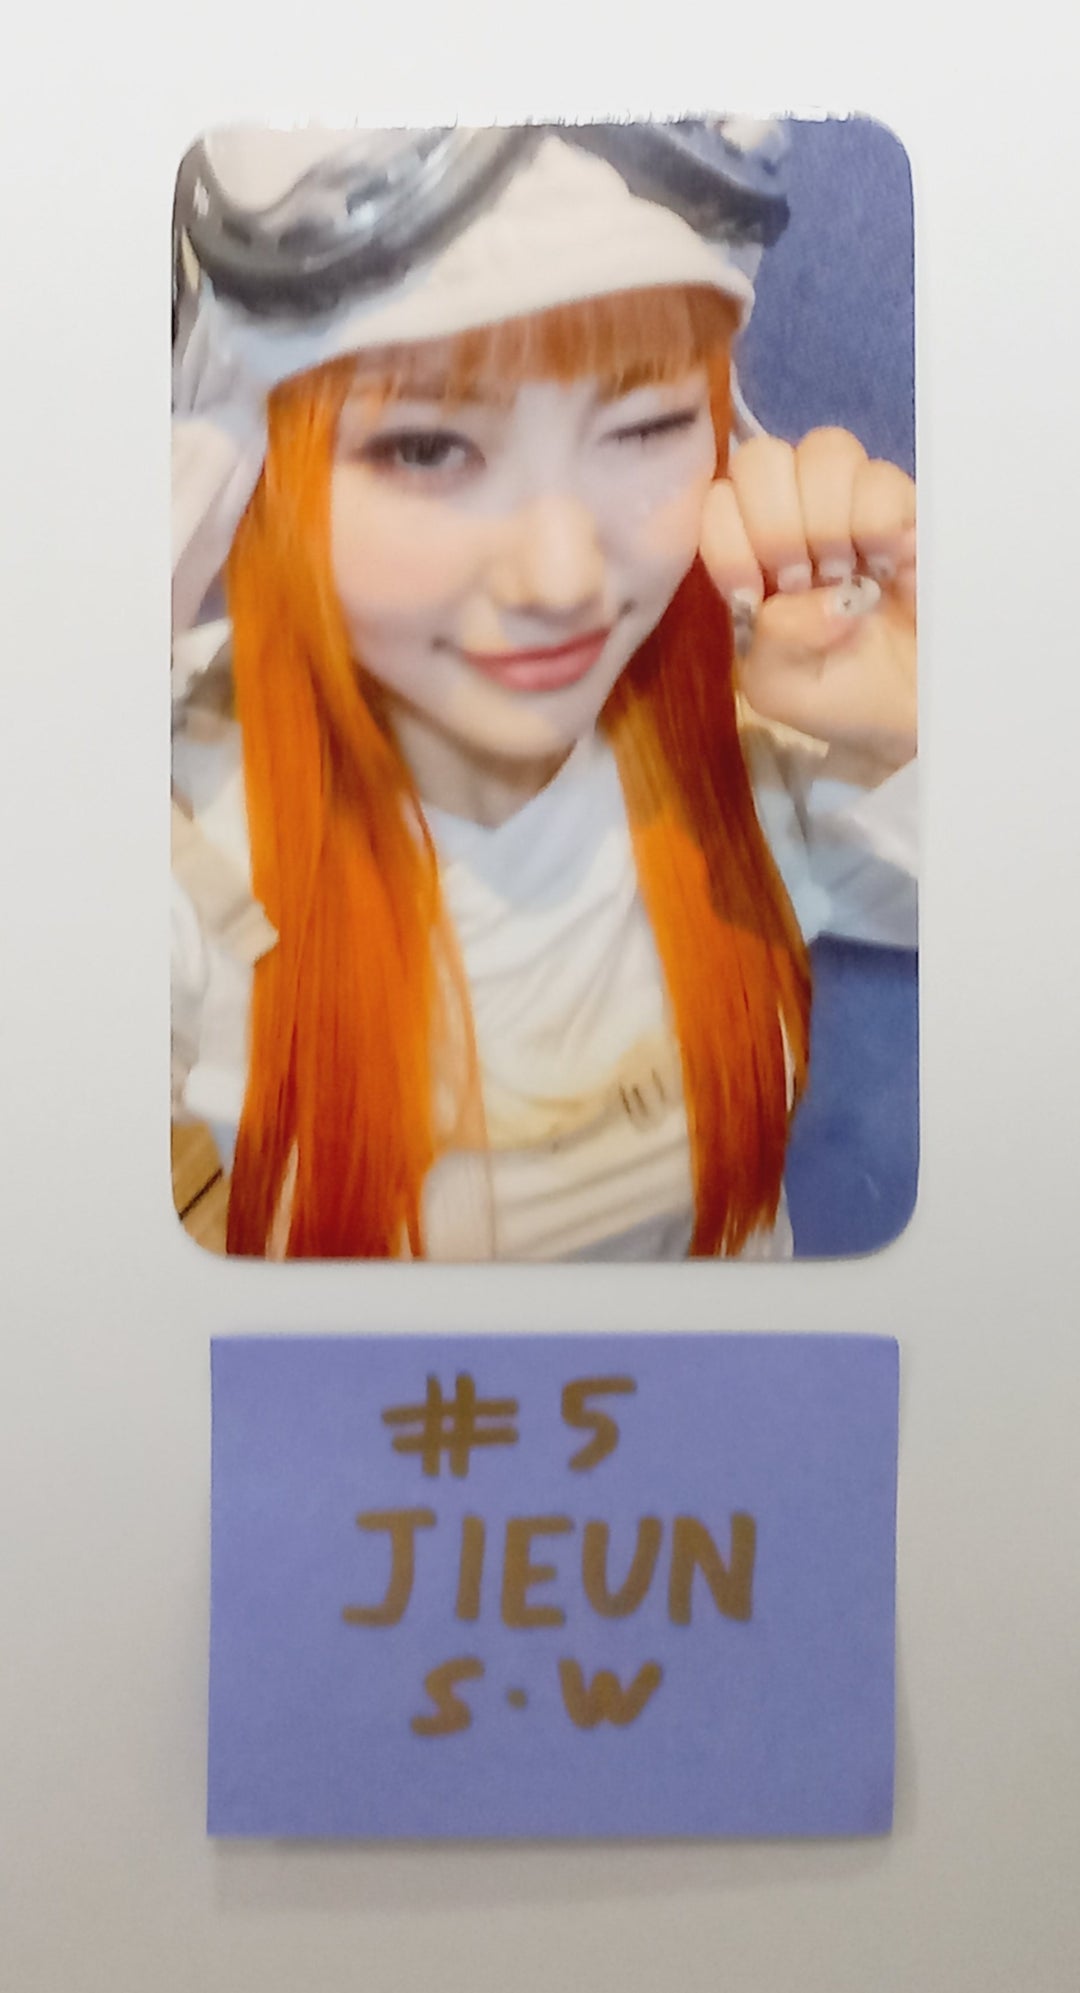 YOUNG POSSE "XXL" - Soundwave Fansign Event Winner Photocard [24.4.12]